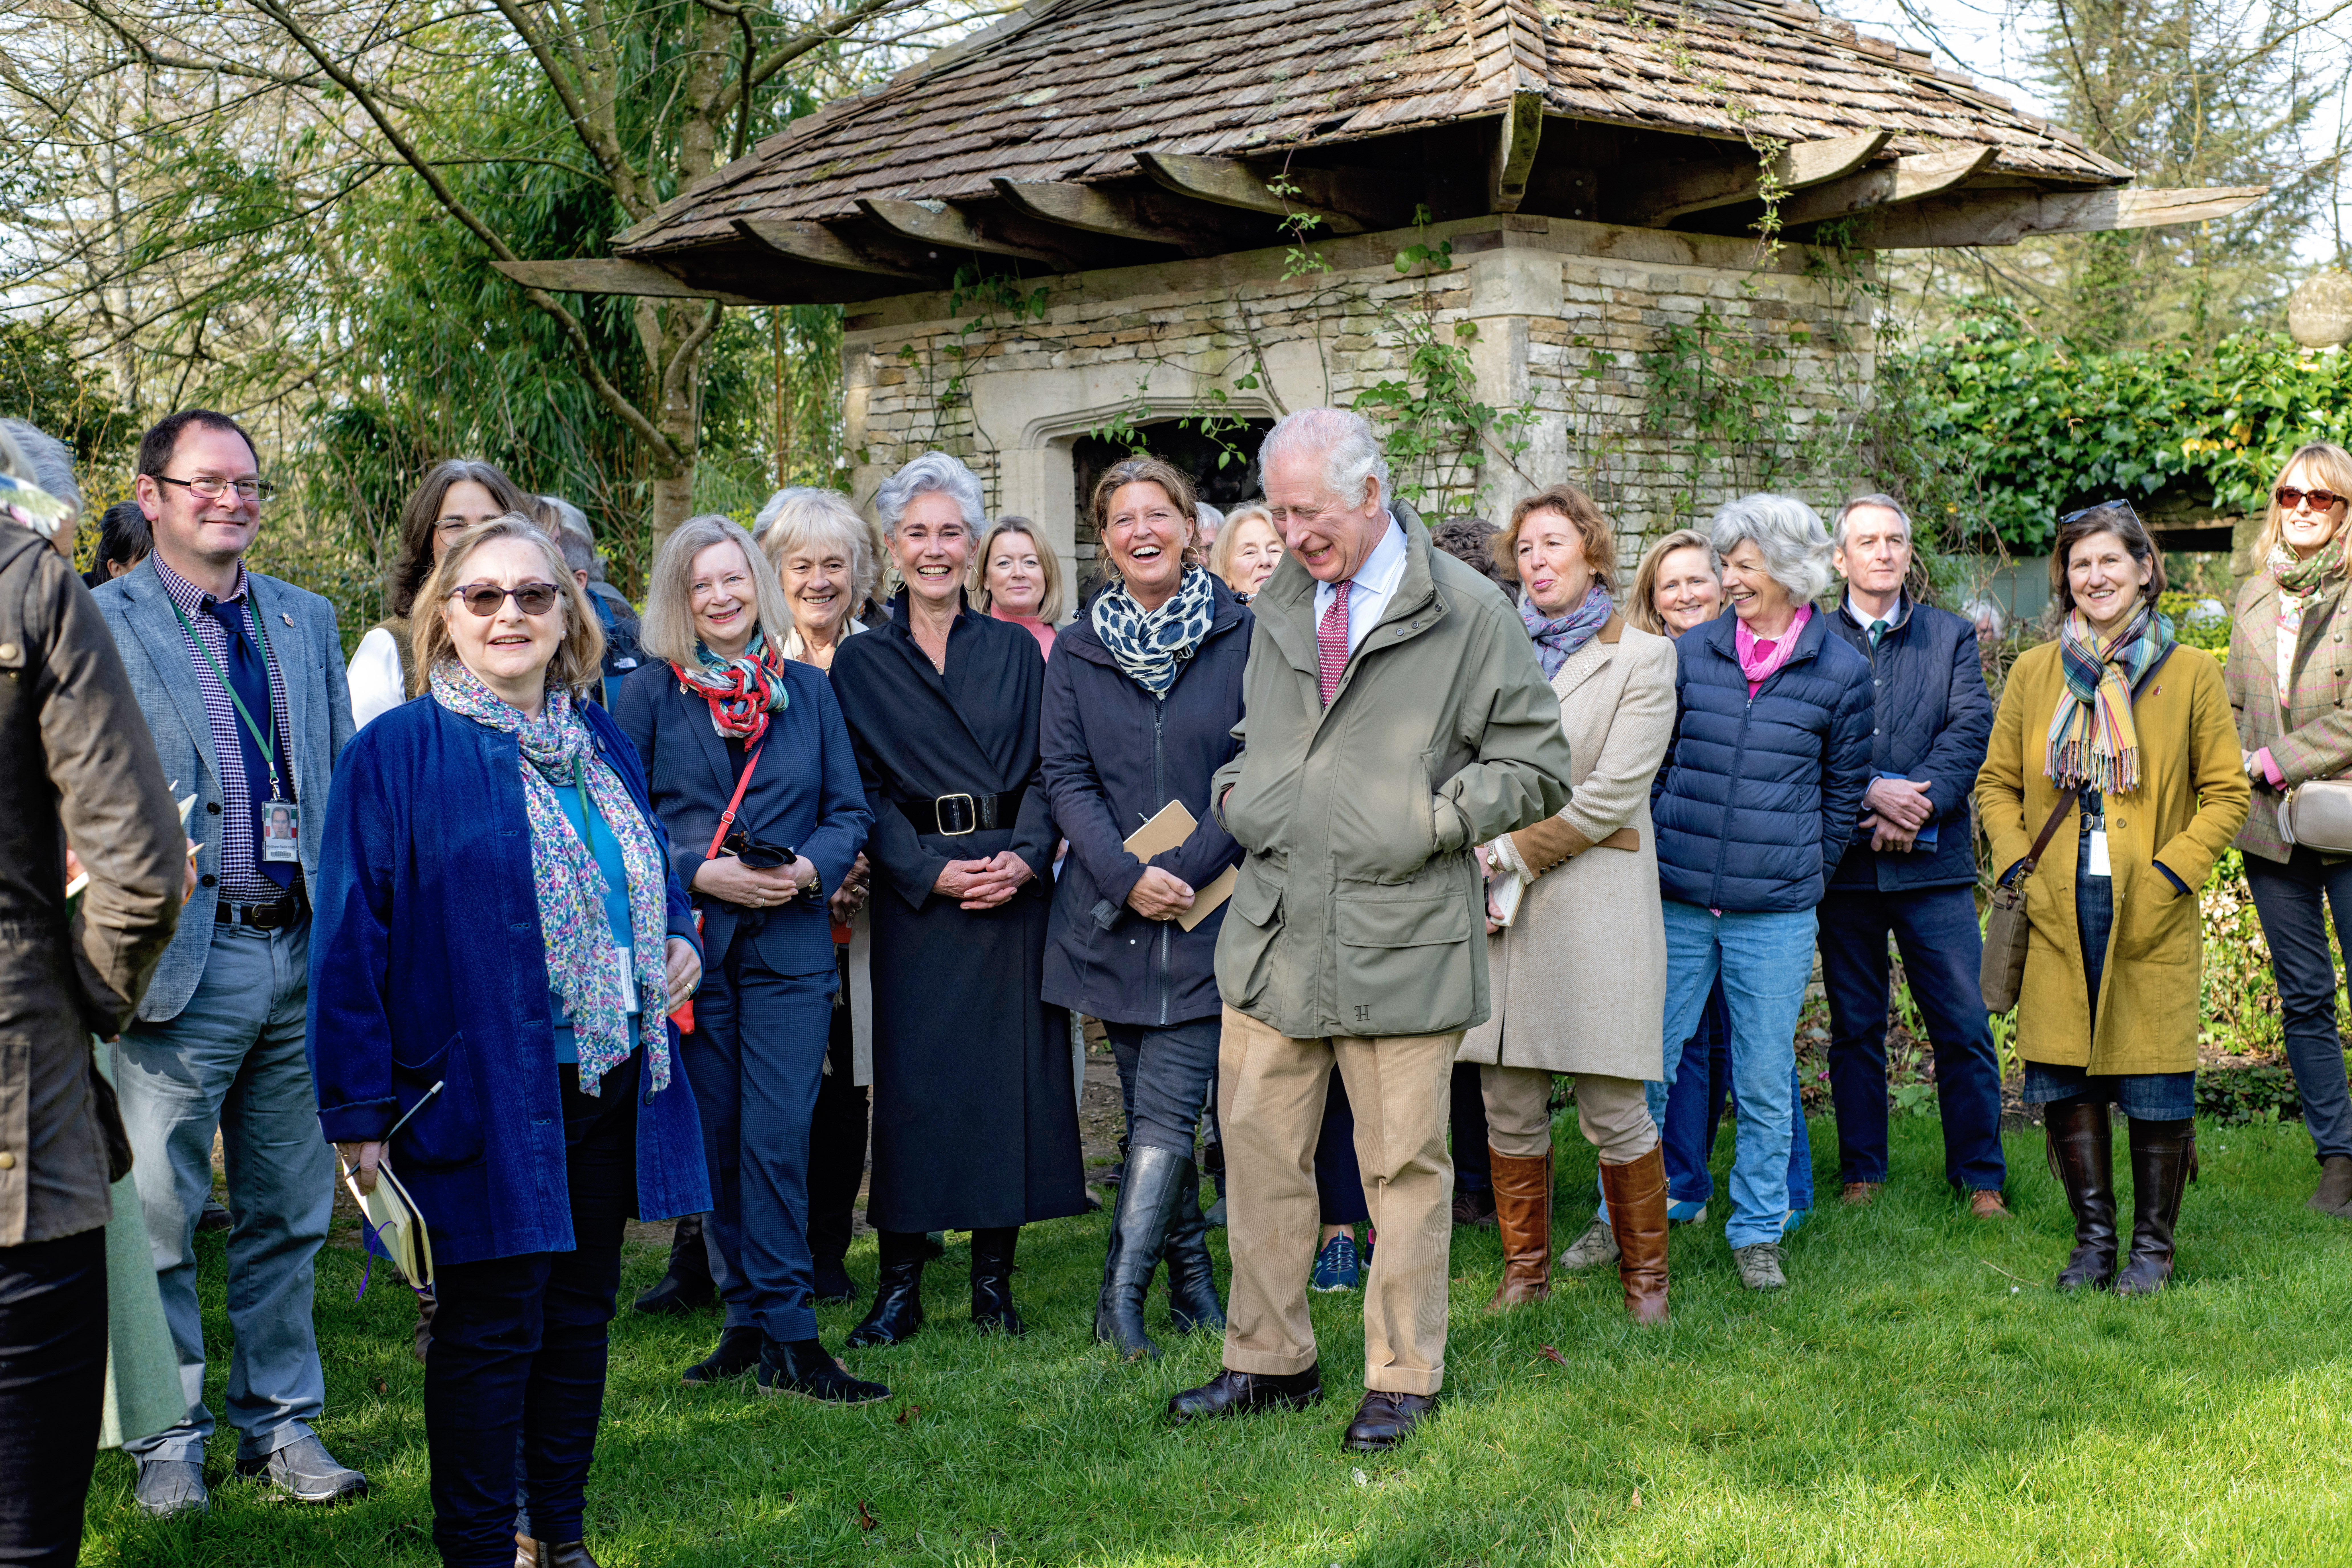 The Prince of Wales leads tour guides on his annual walk around Highgrove Gardens in Gloucestershire (Leanne Punshon)